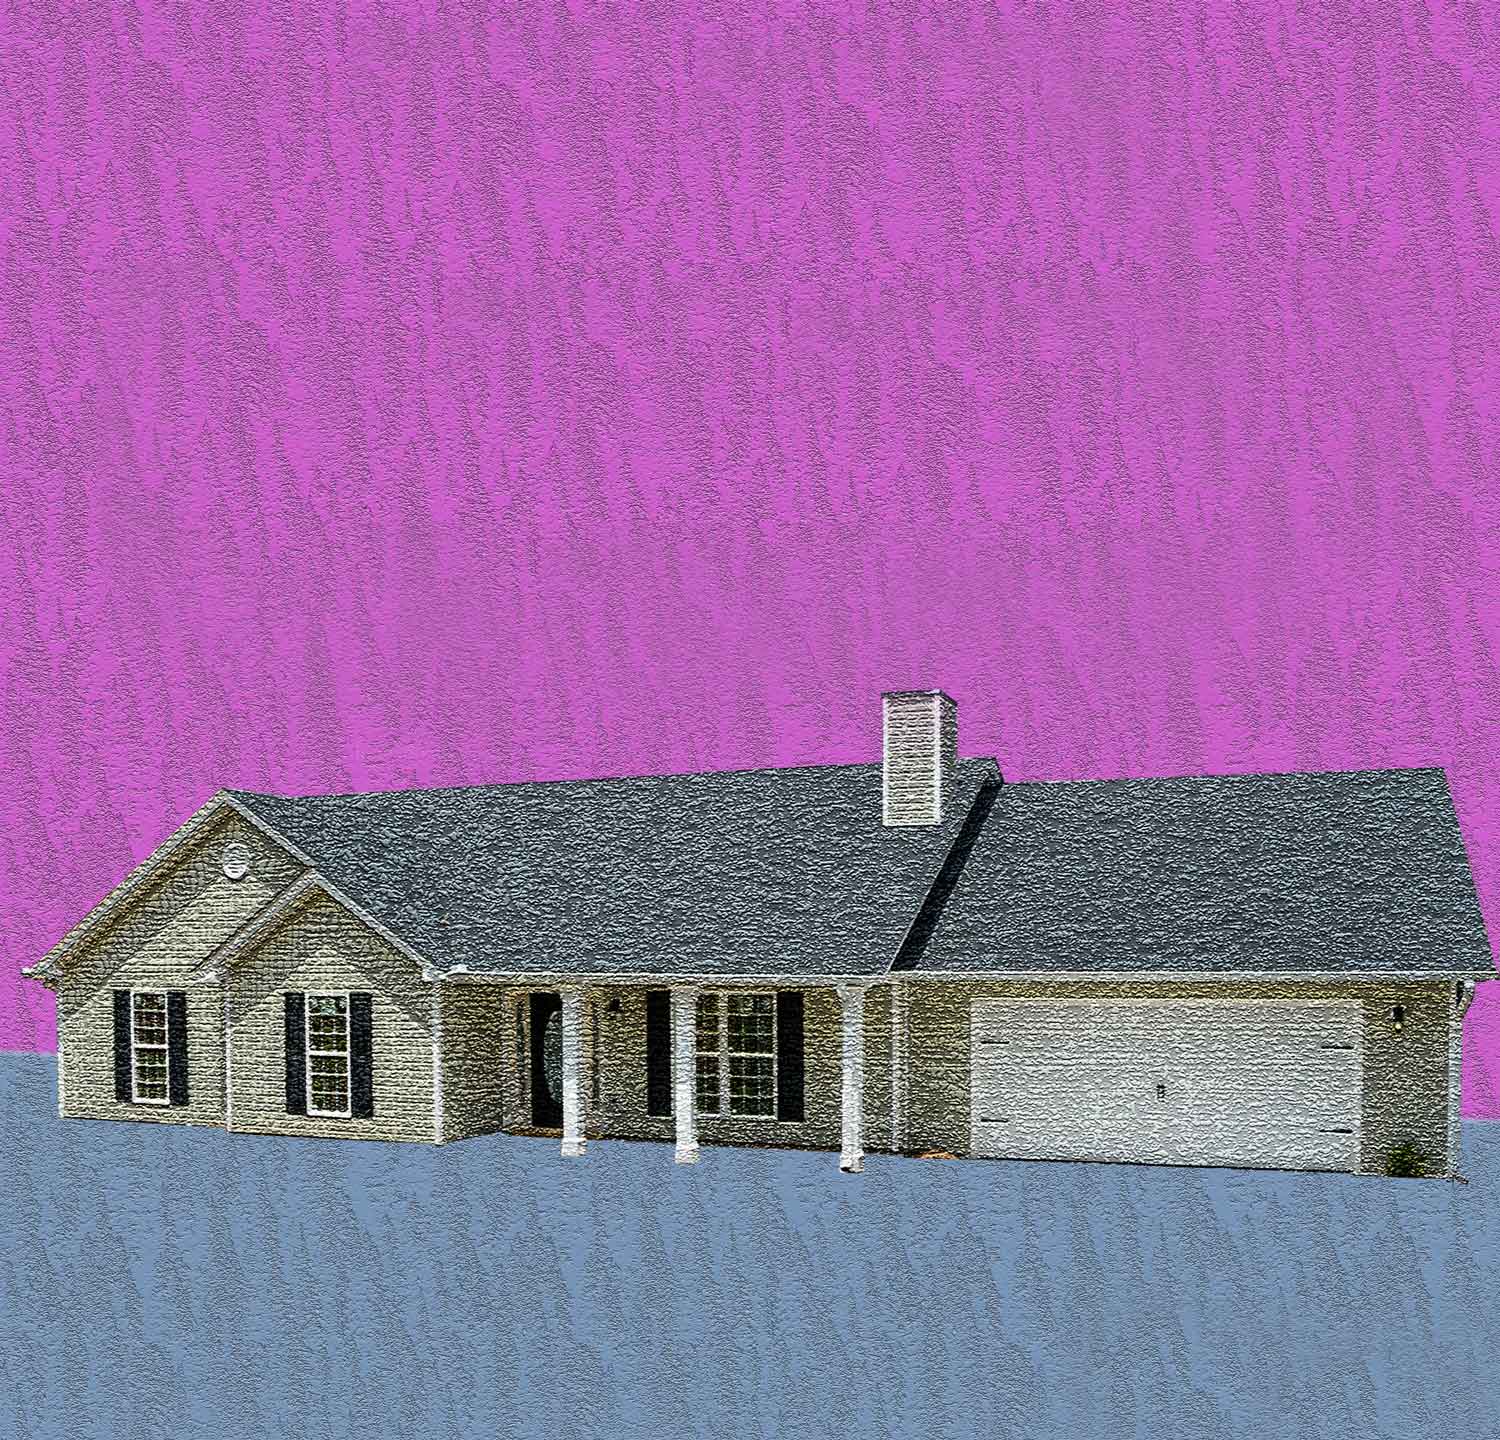 Illustrative image of a black and white house with a magenta sky and blue ground